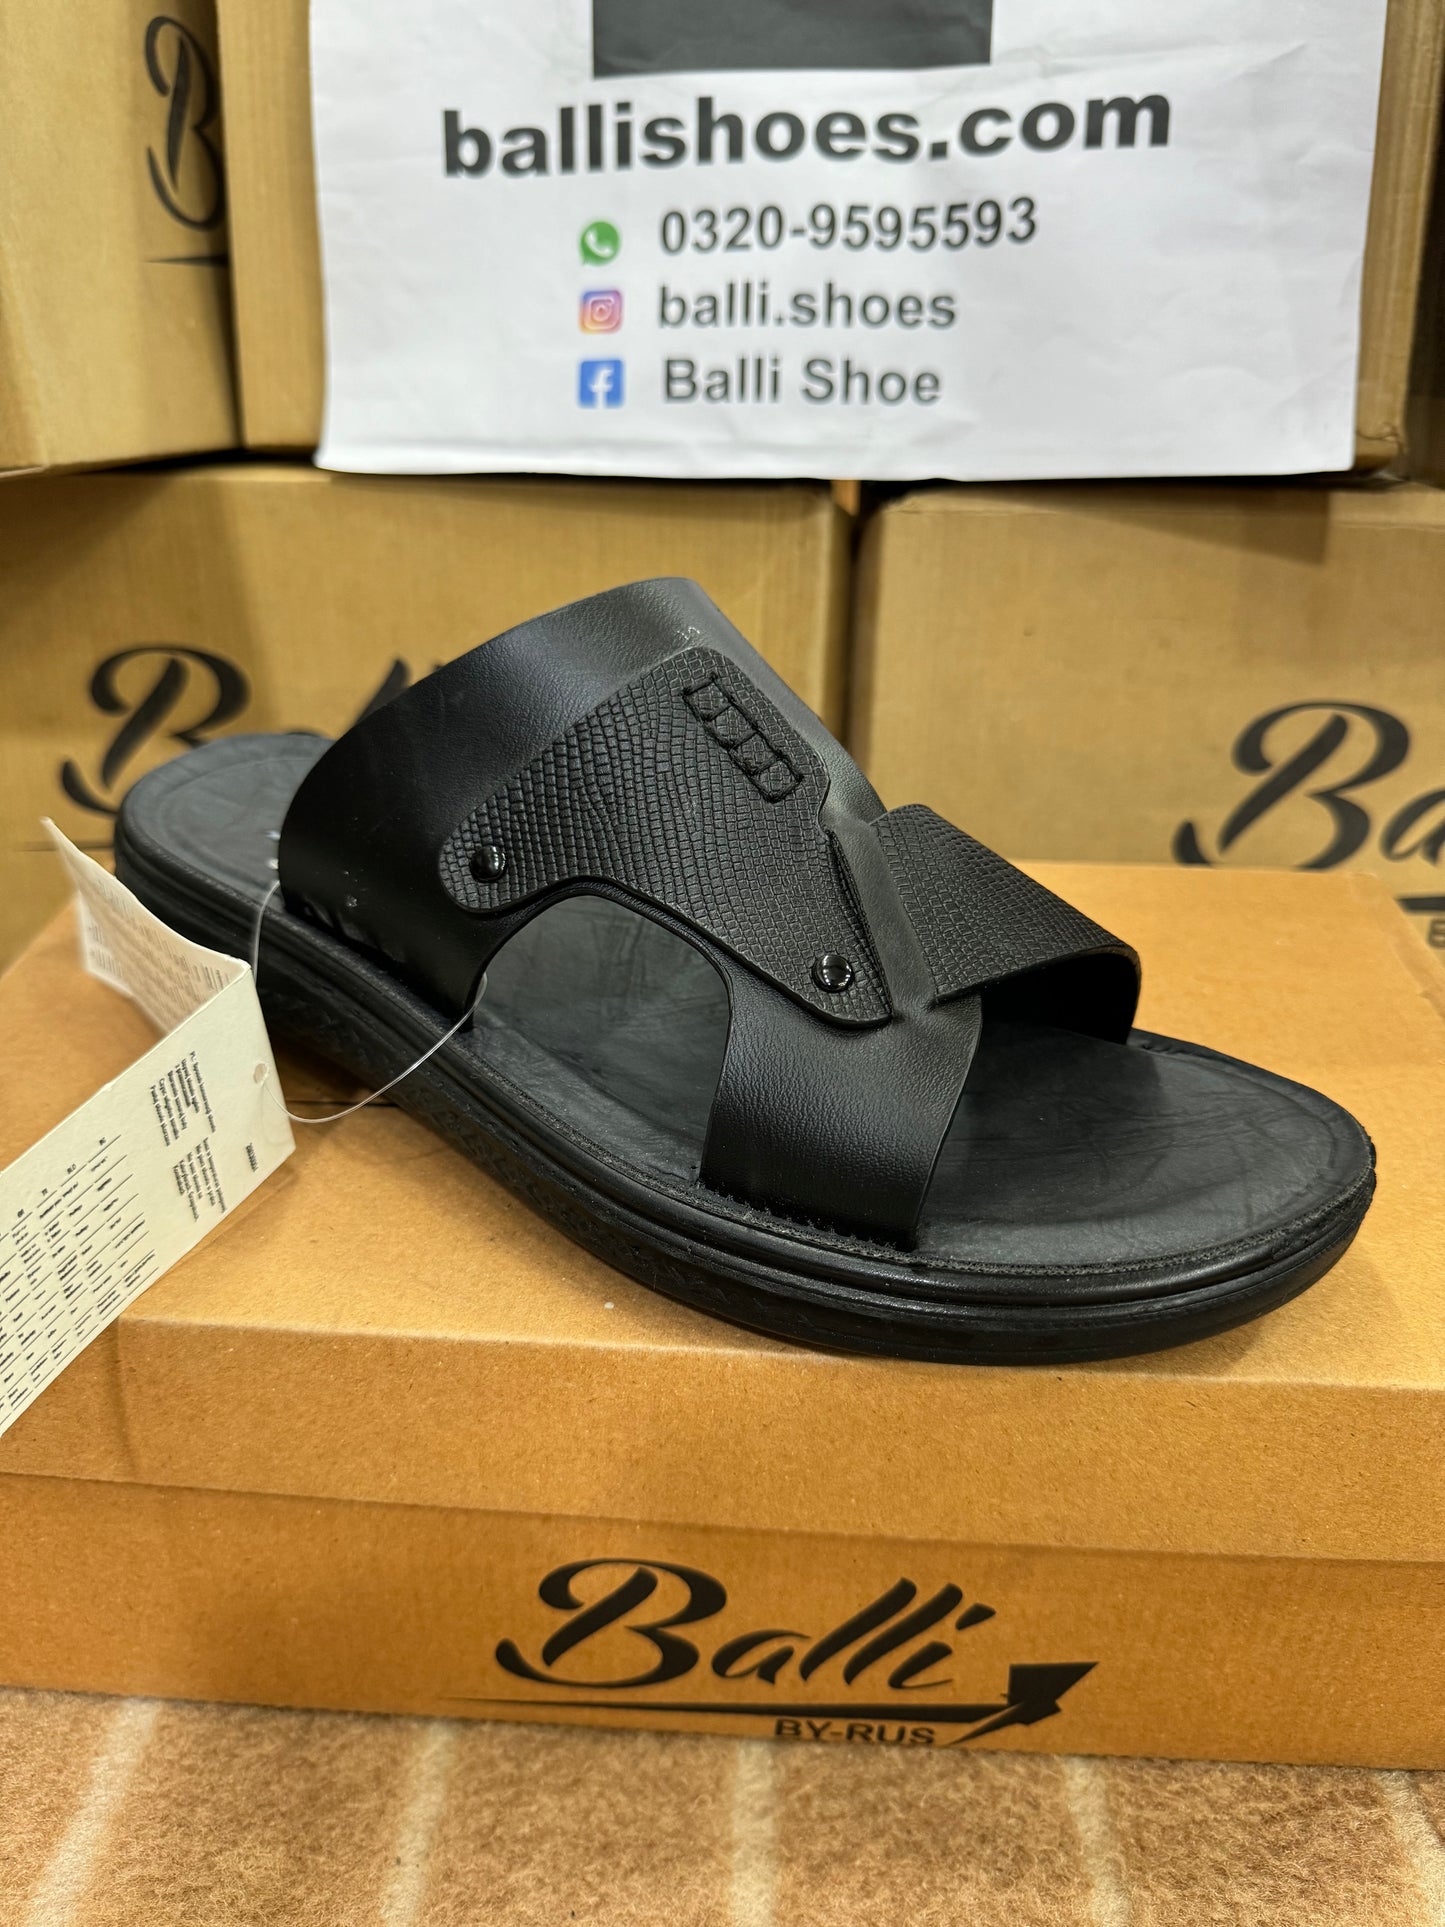 BS - Slippers 2.0 – Balli Shoes